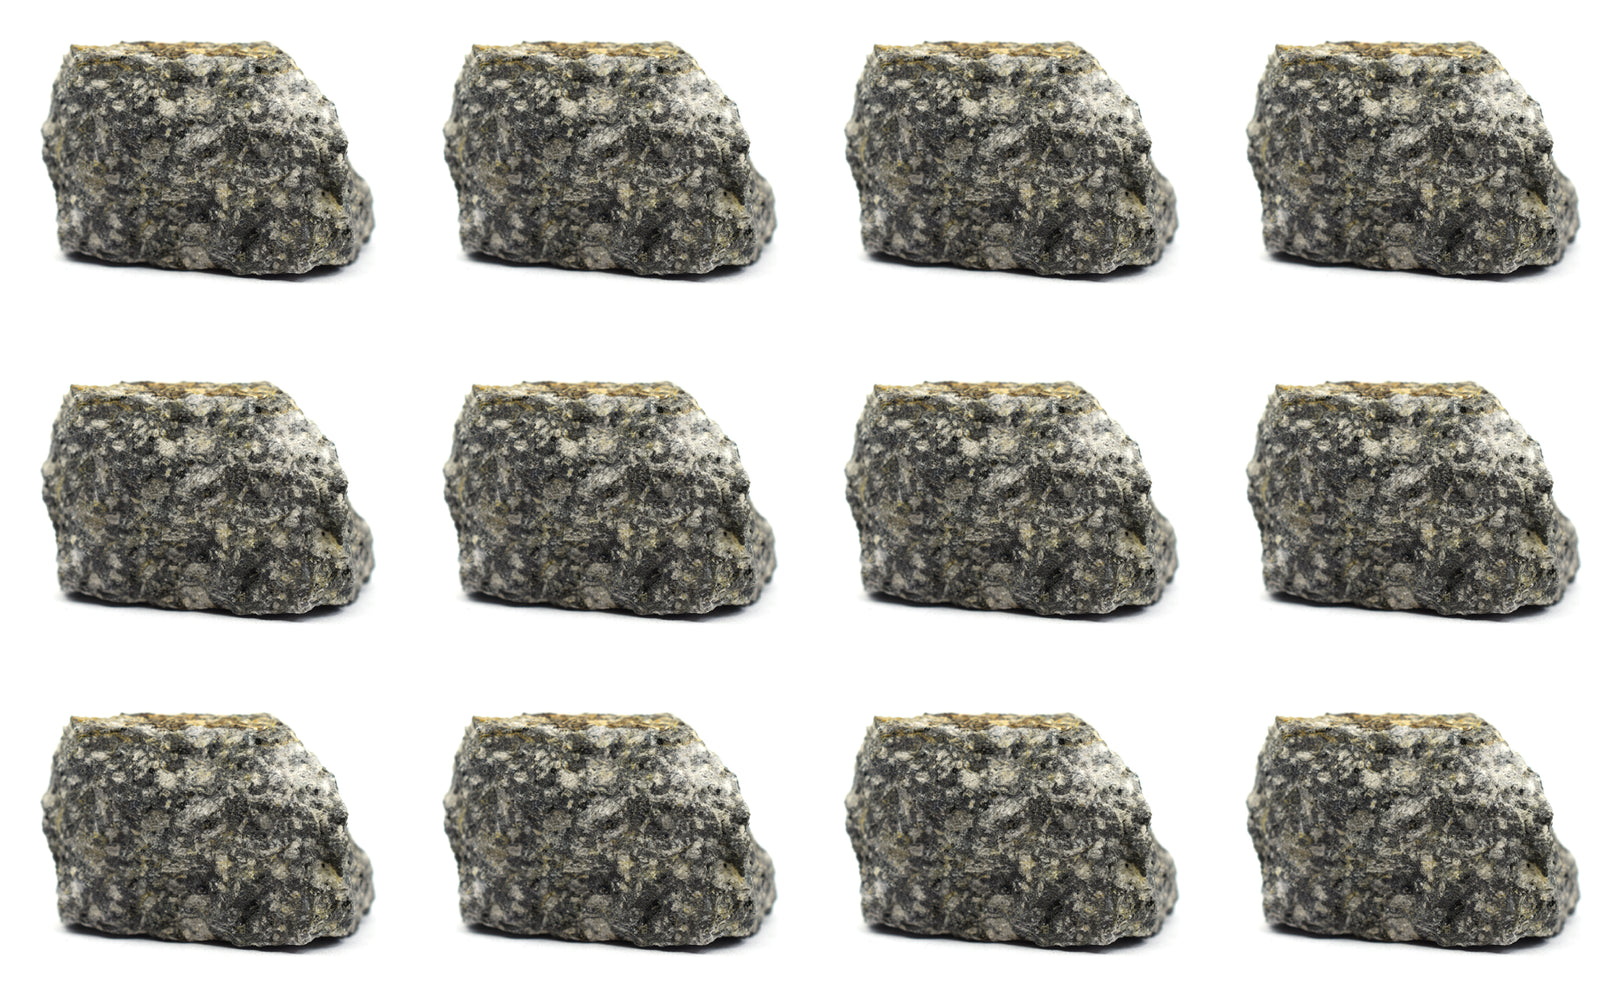 12 Pack - Raw Andesite, Igneous Rock Specimens - Approx. 1"